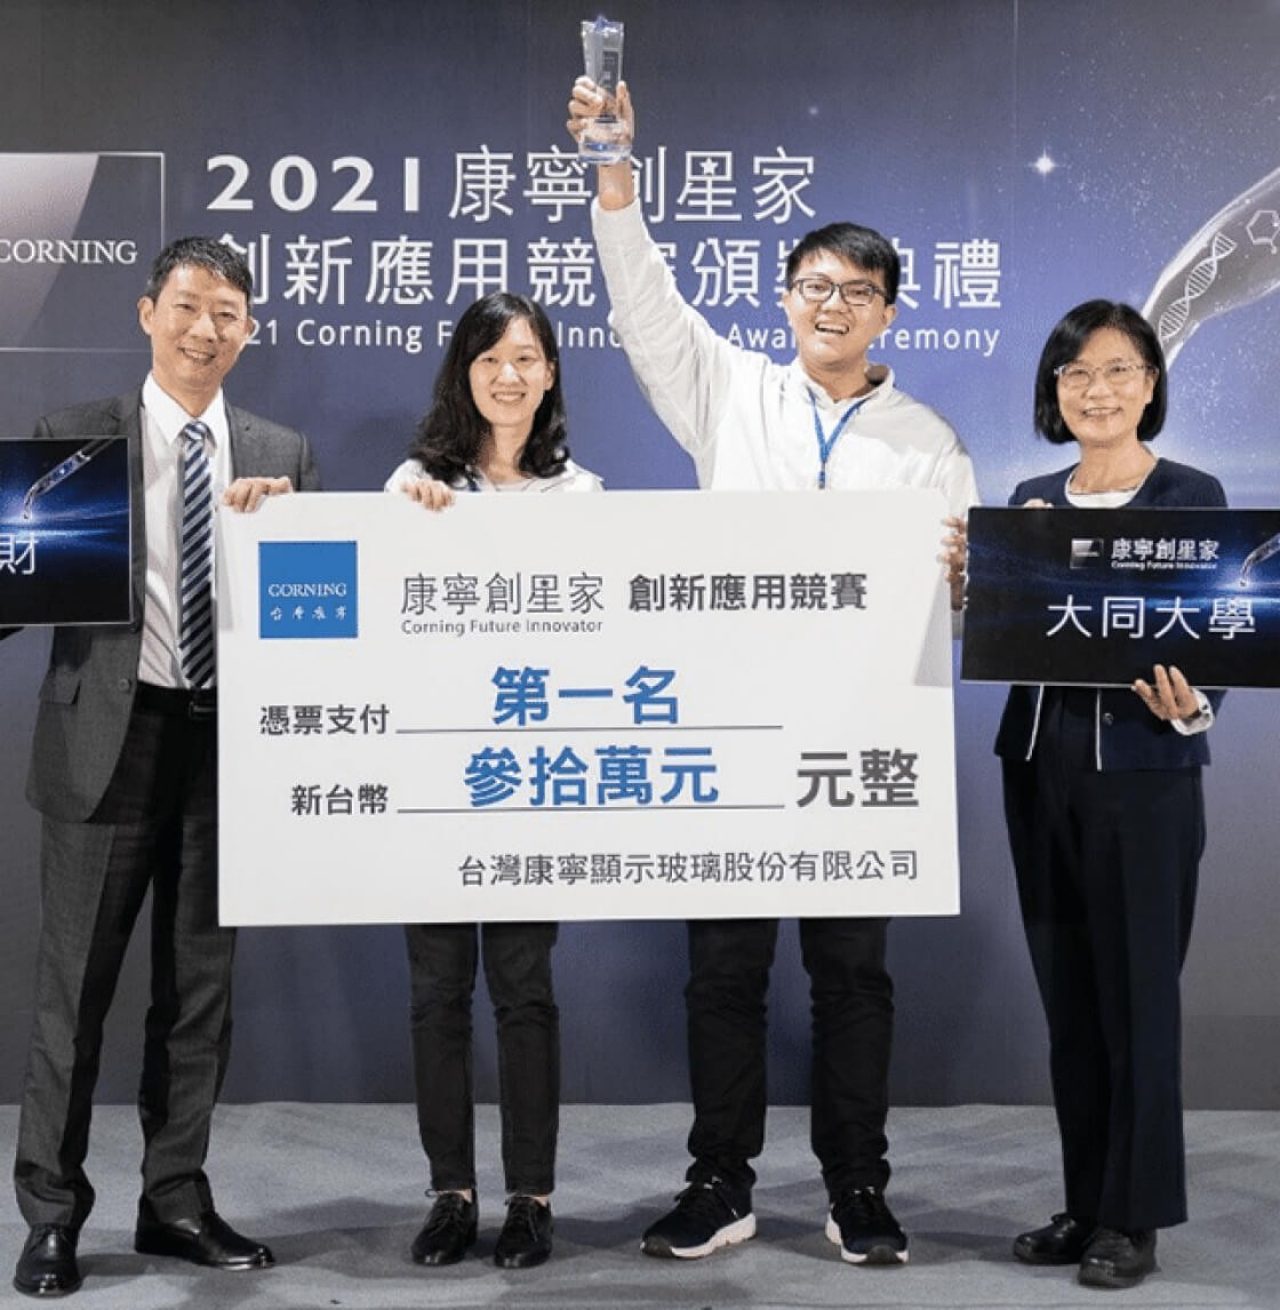 The first-place winners, Ling-Wen Huang and Yi-Hong Zhong, presented their idea of using Corning's fiber on a mountain rescue device.